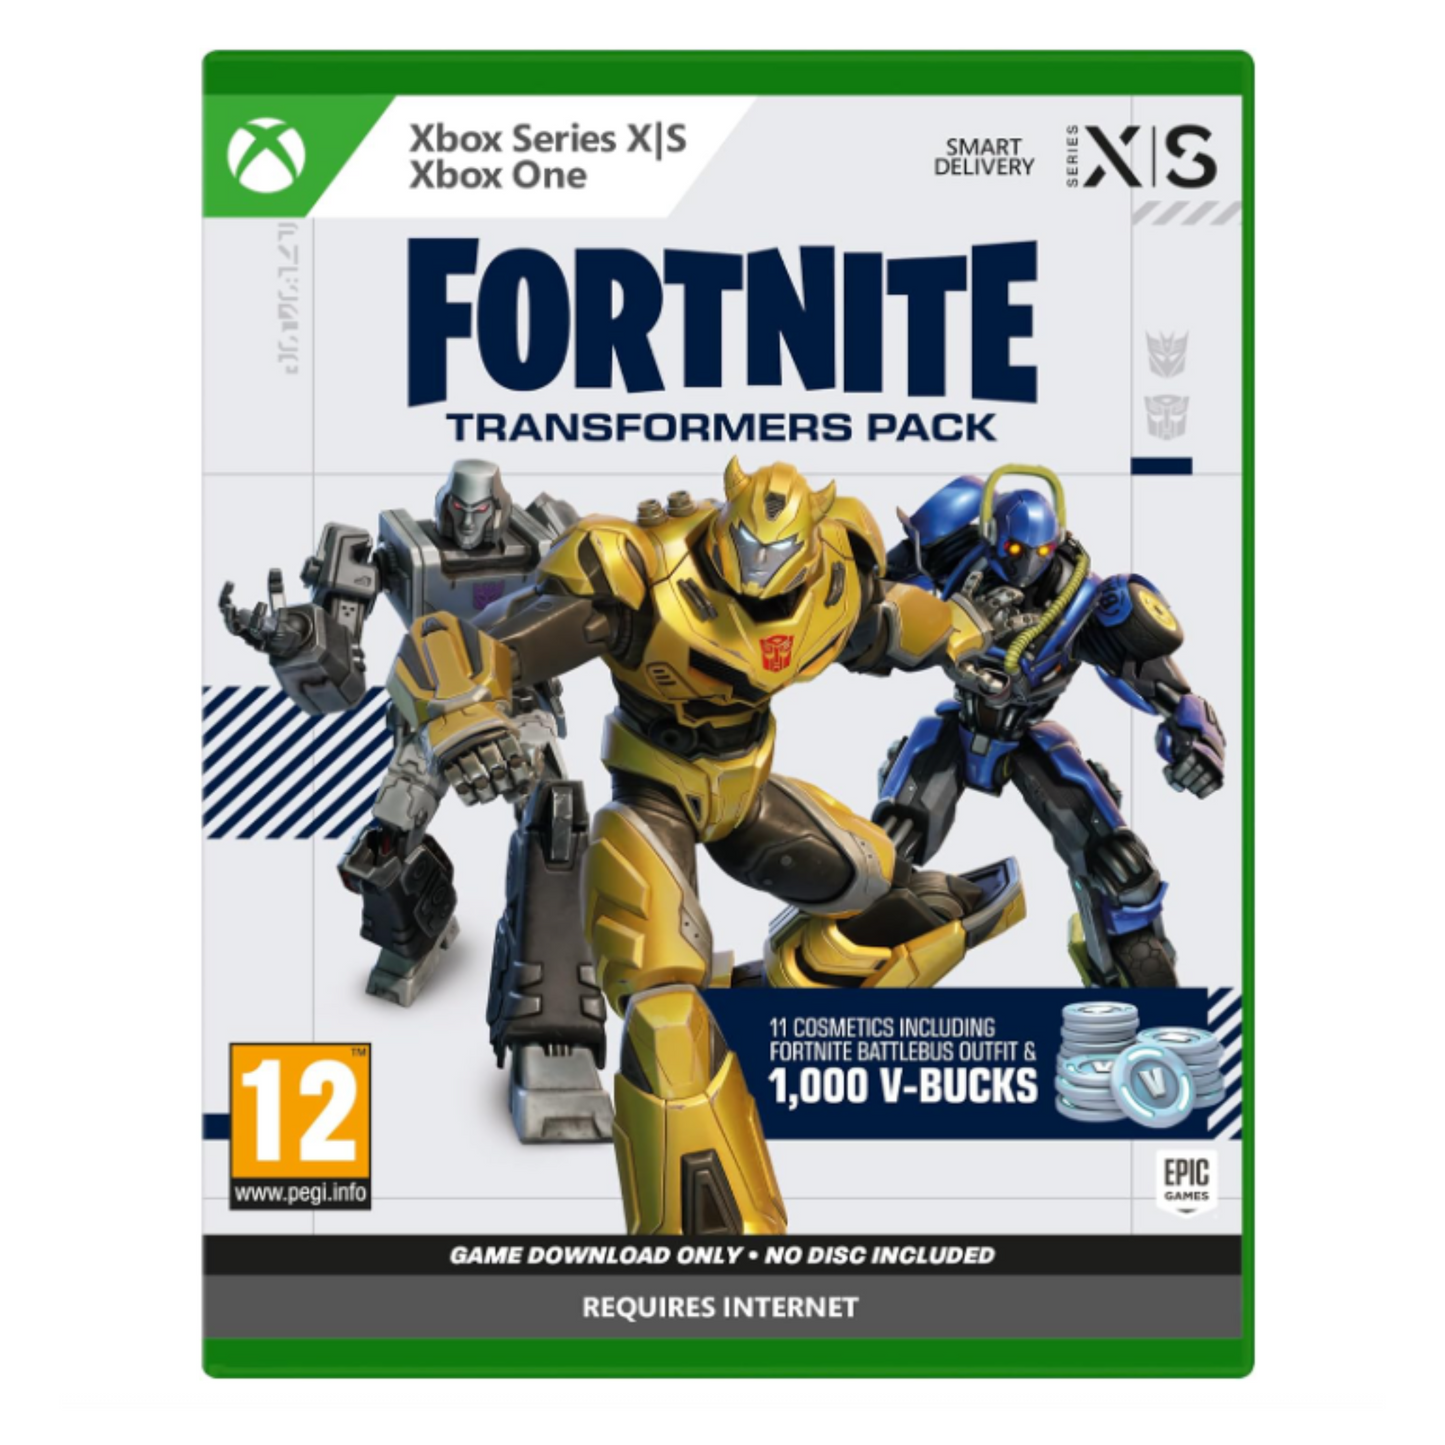 Fortnite Transformers Pack for Xbox Series X/S and Xbox One